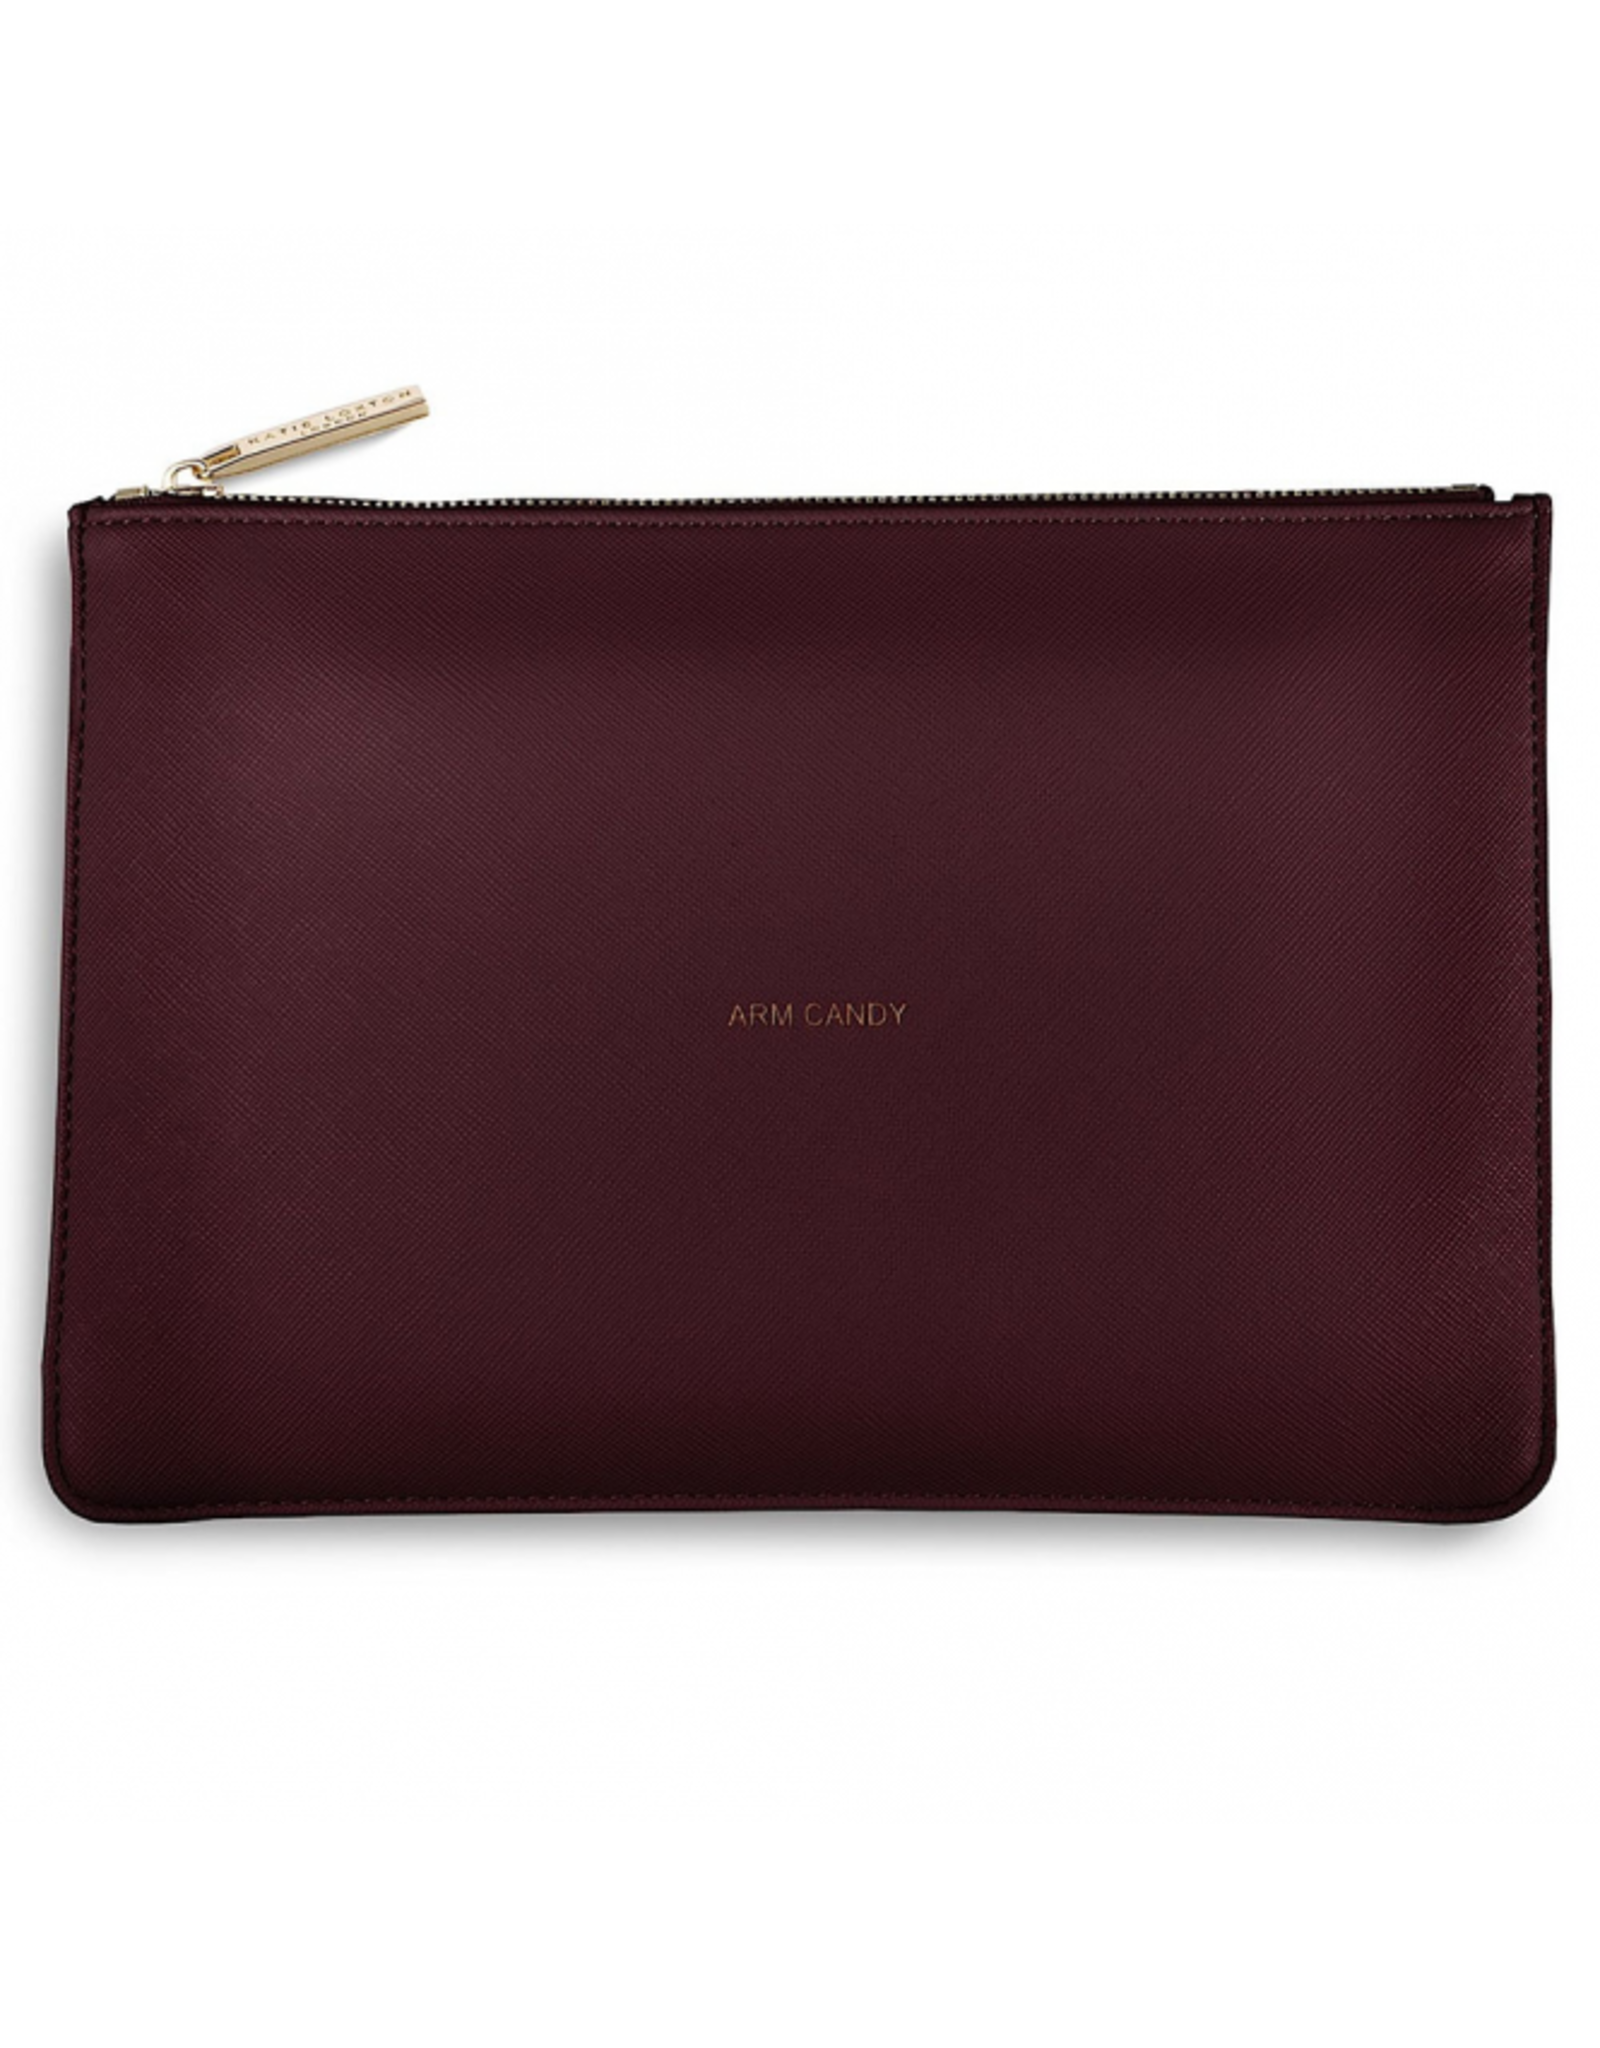 KATIE LOXTON PERF POUCH ARM CANDY BURGUNDY